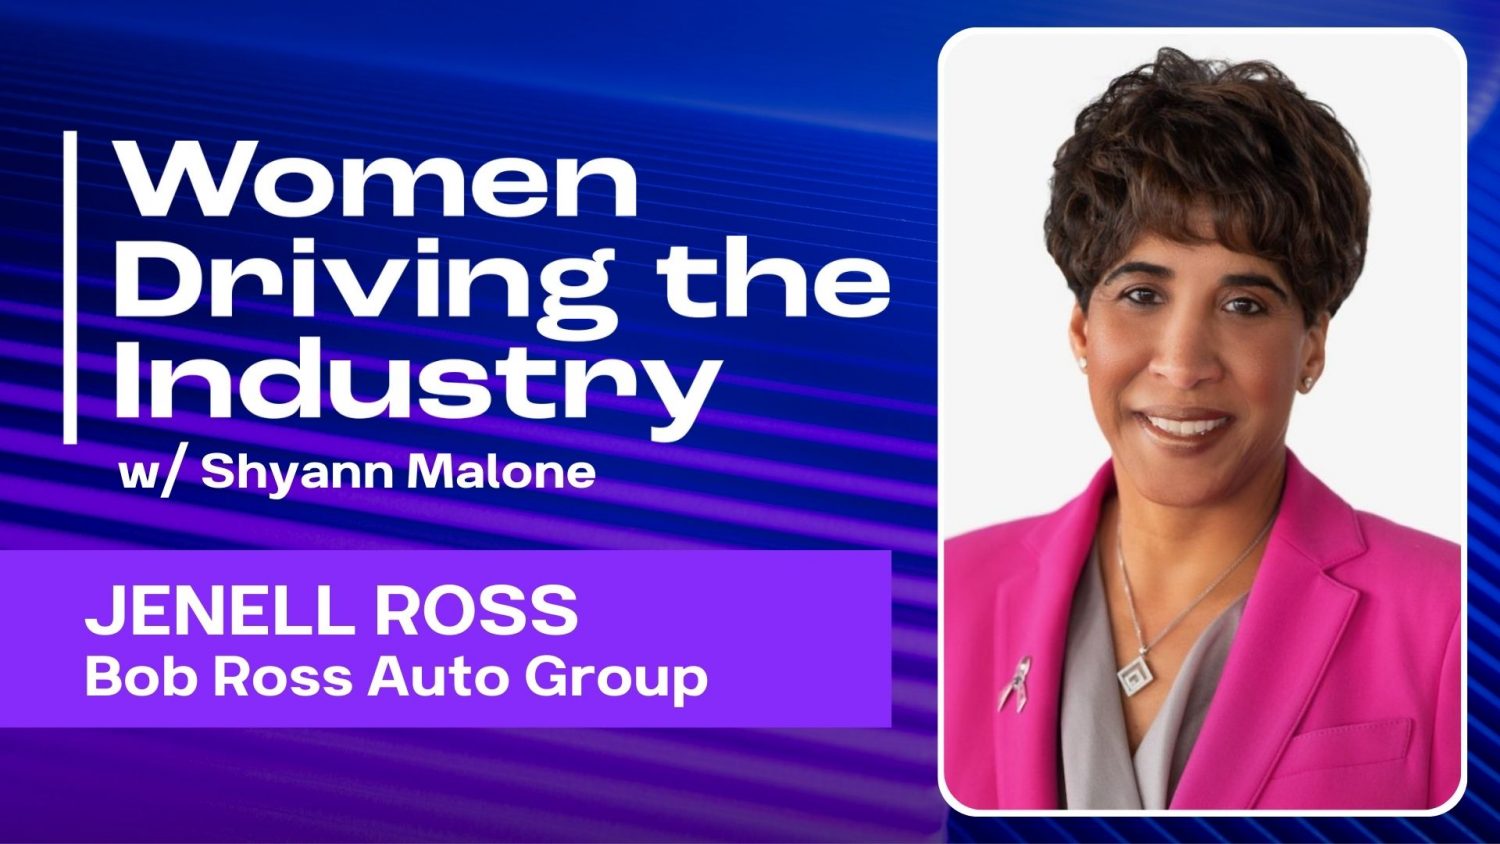 In this episode of Women Driving the Industry, we explore Jenell Ross's personal journey as a leader in the automotive industry.